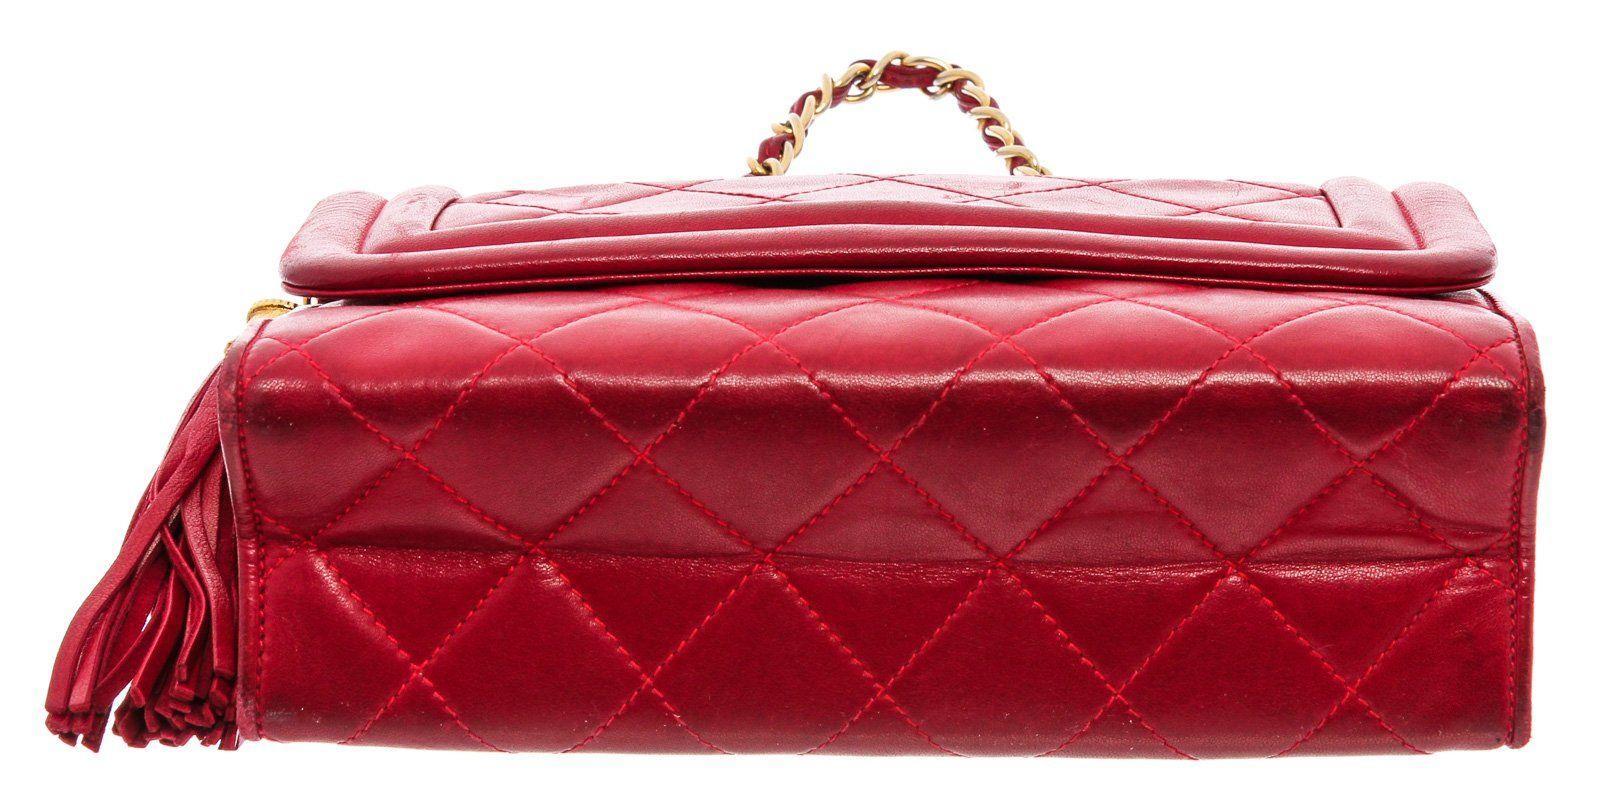 Women's Chanel Vintage Red Quilted Leather Camera Bag